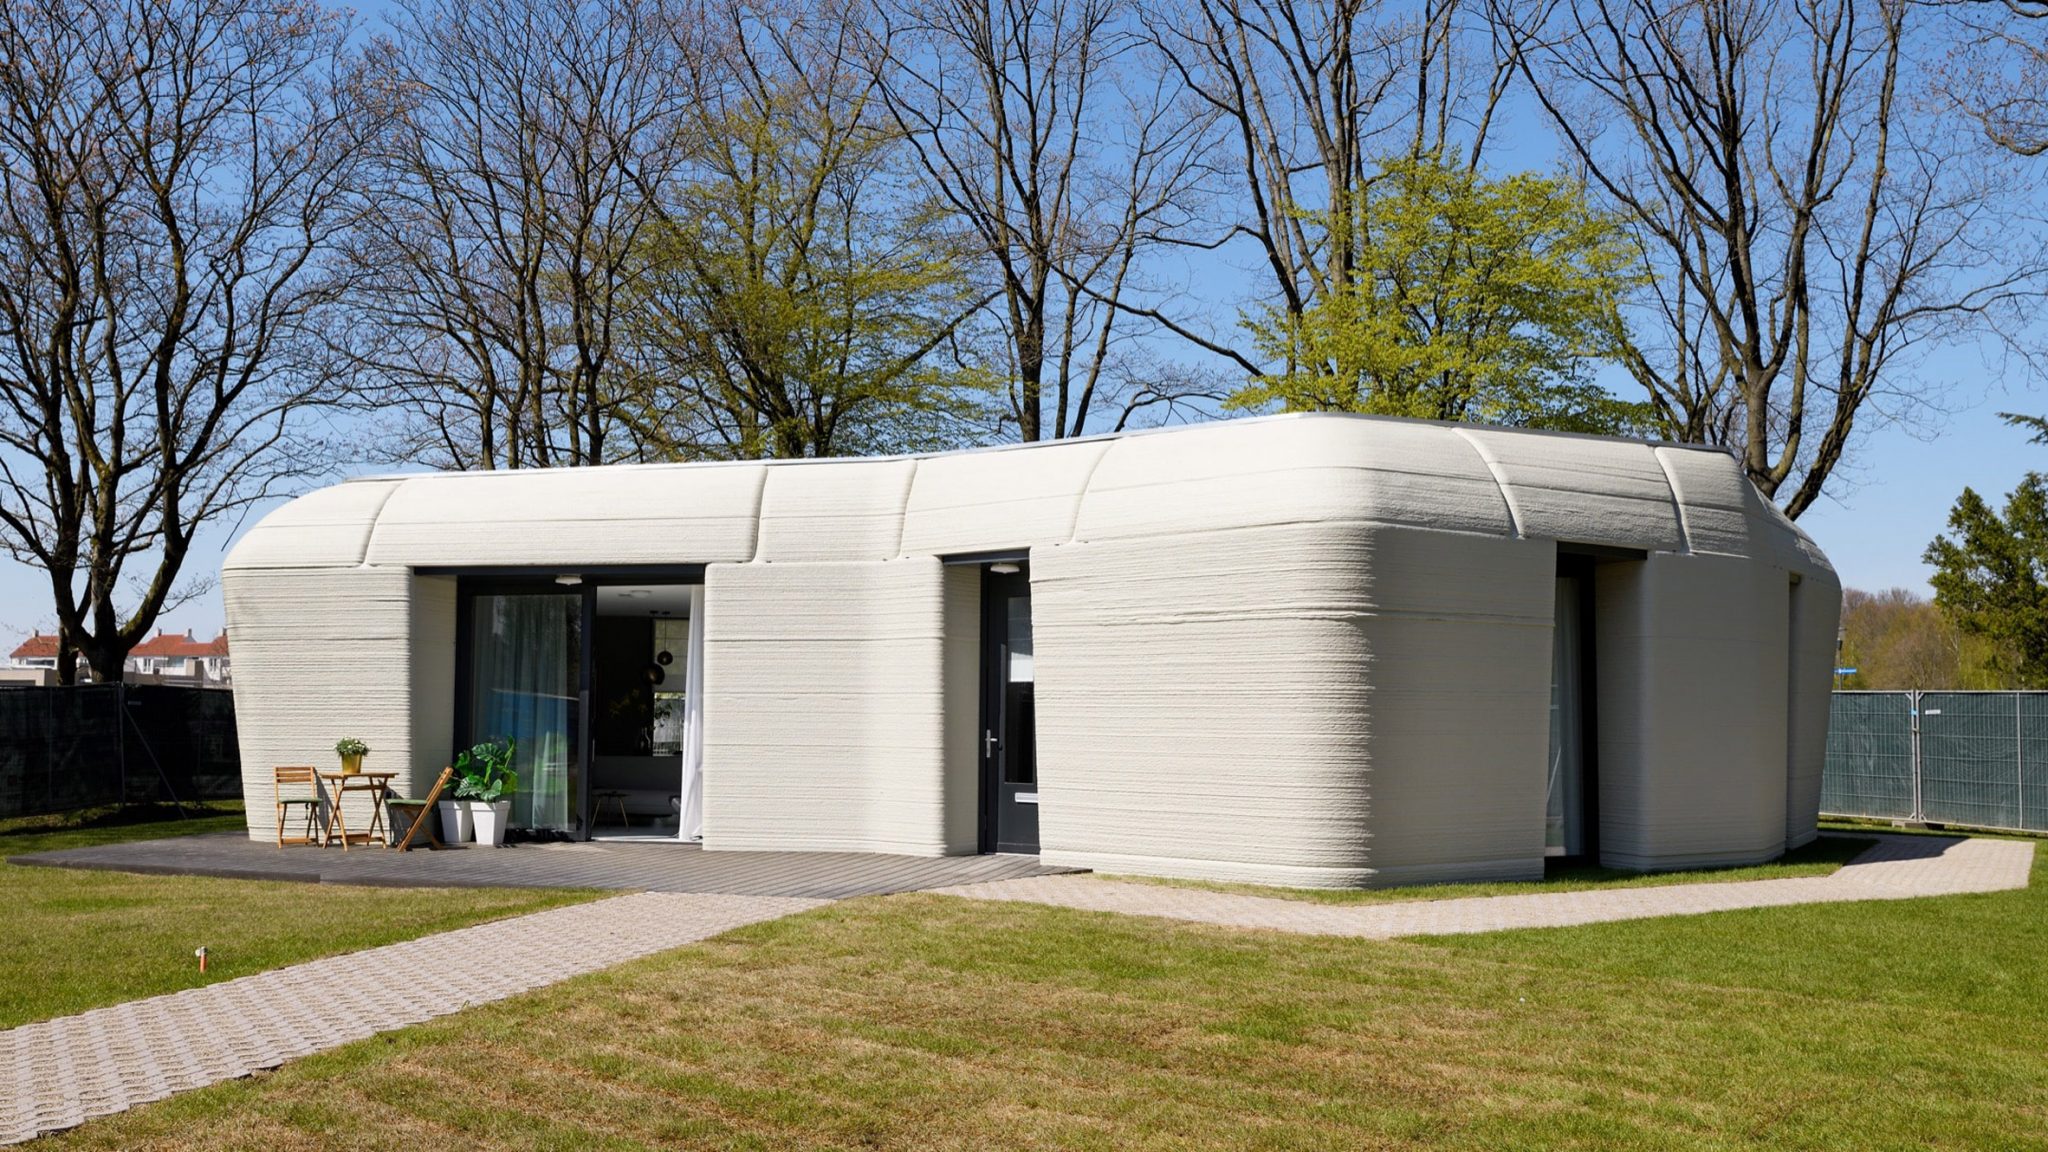 A boulder-shaped concrete house in the Netherlands has become the first lived-in 3D-printed home in the country after its tenants received the key on April 30.

Located in a suburb of Eindhoven, the single-storey home was built as part of a five-home 3D printing scheme named Project Milestone, and is said to be the first 3D-printed home in Europe where people actually live.